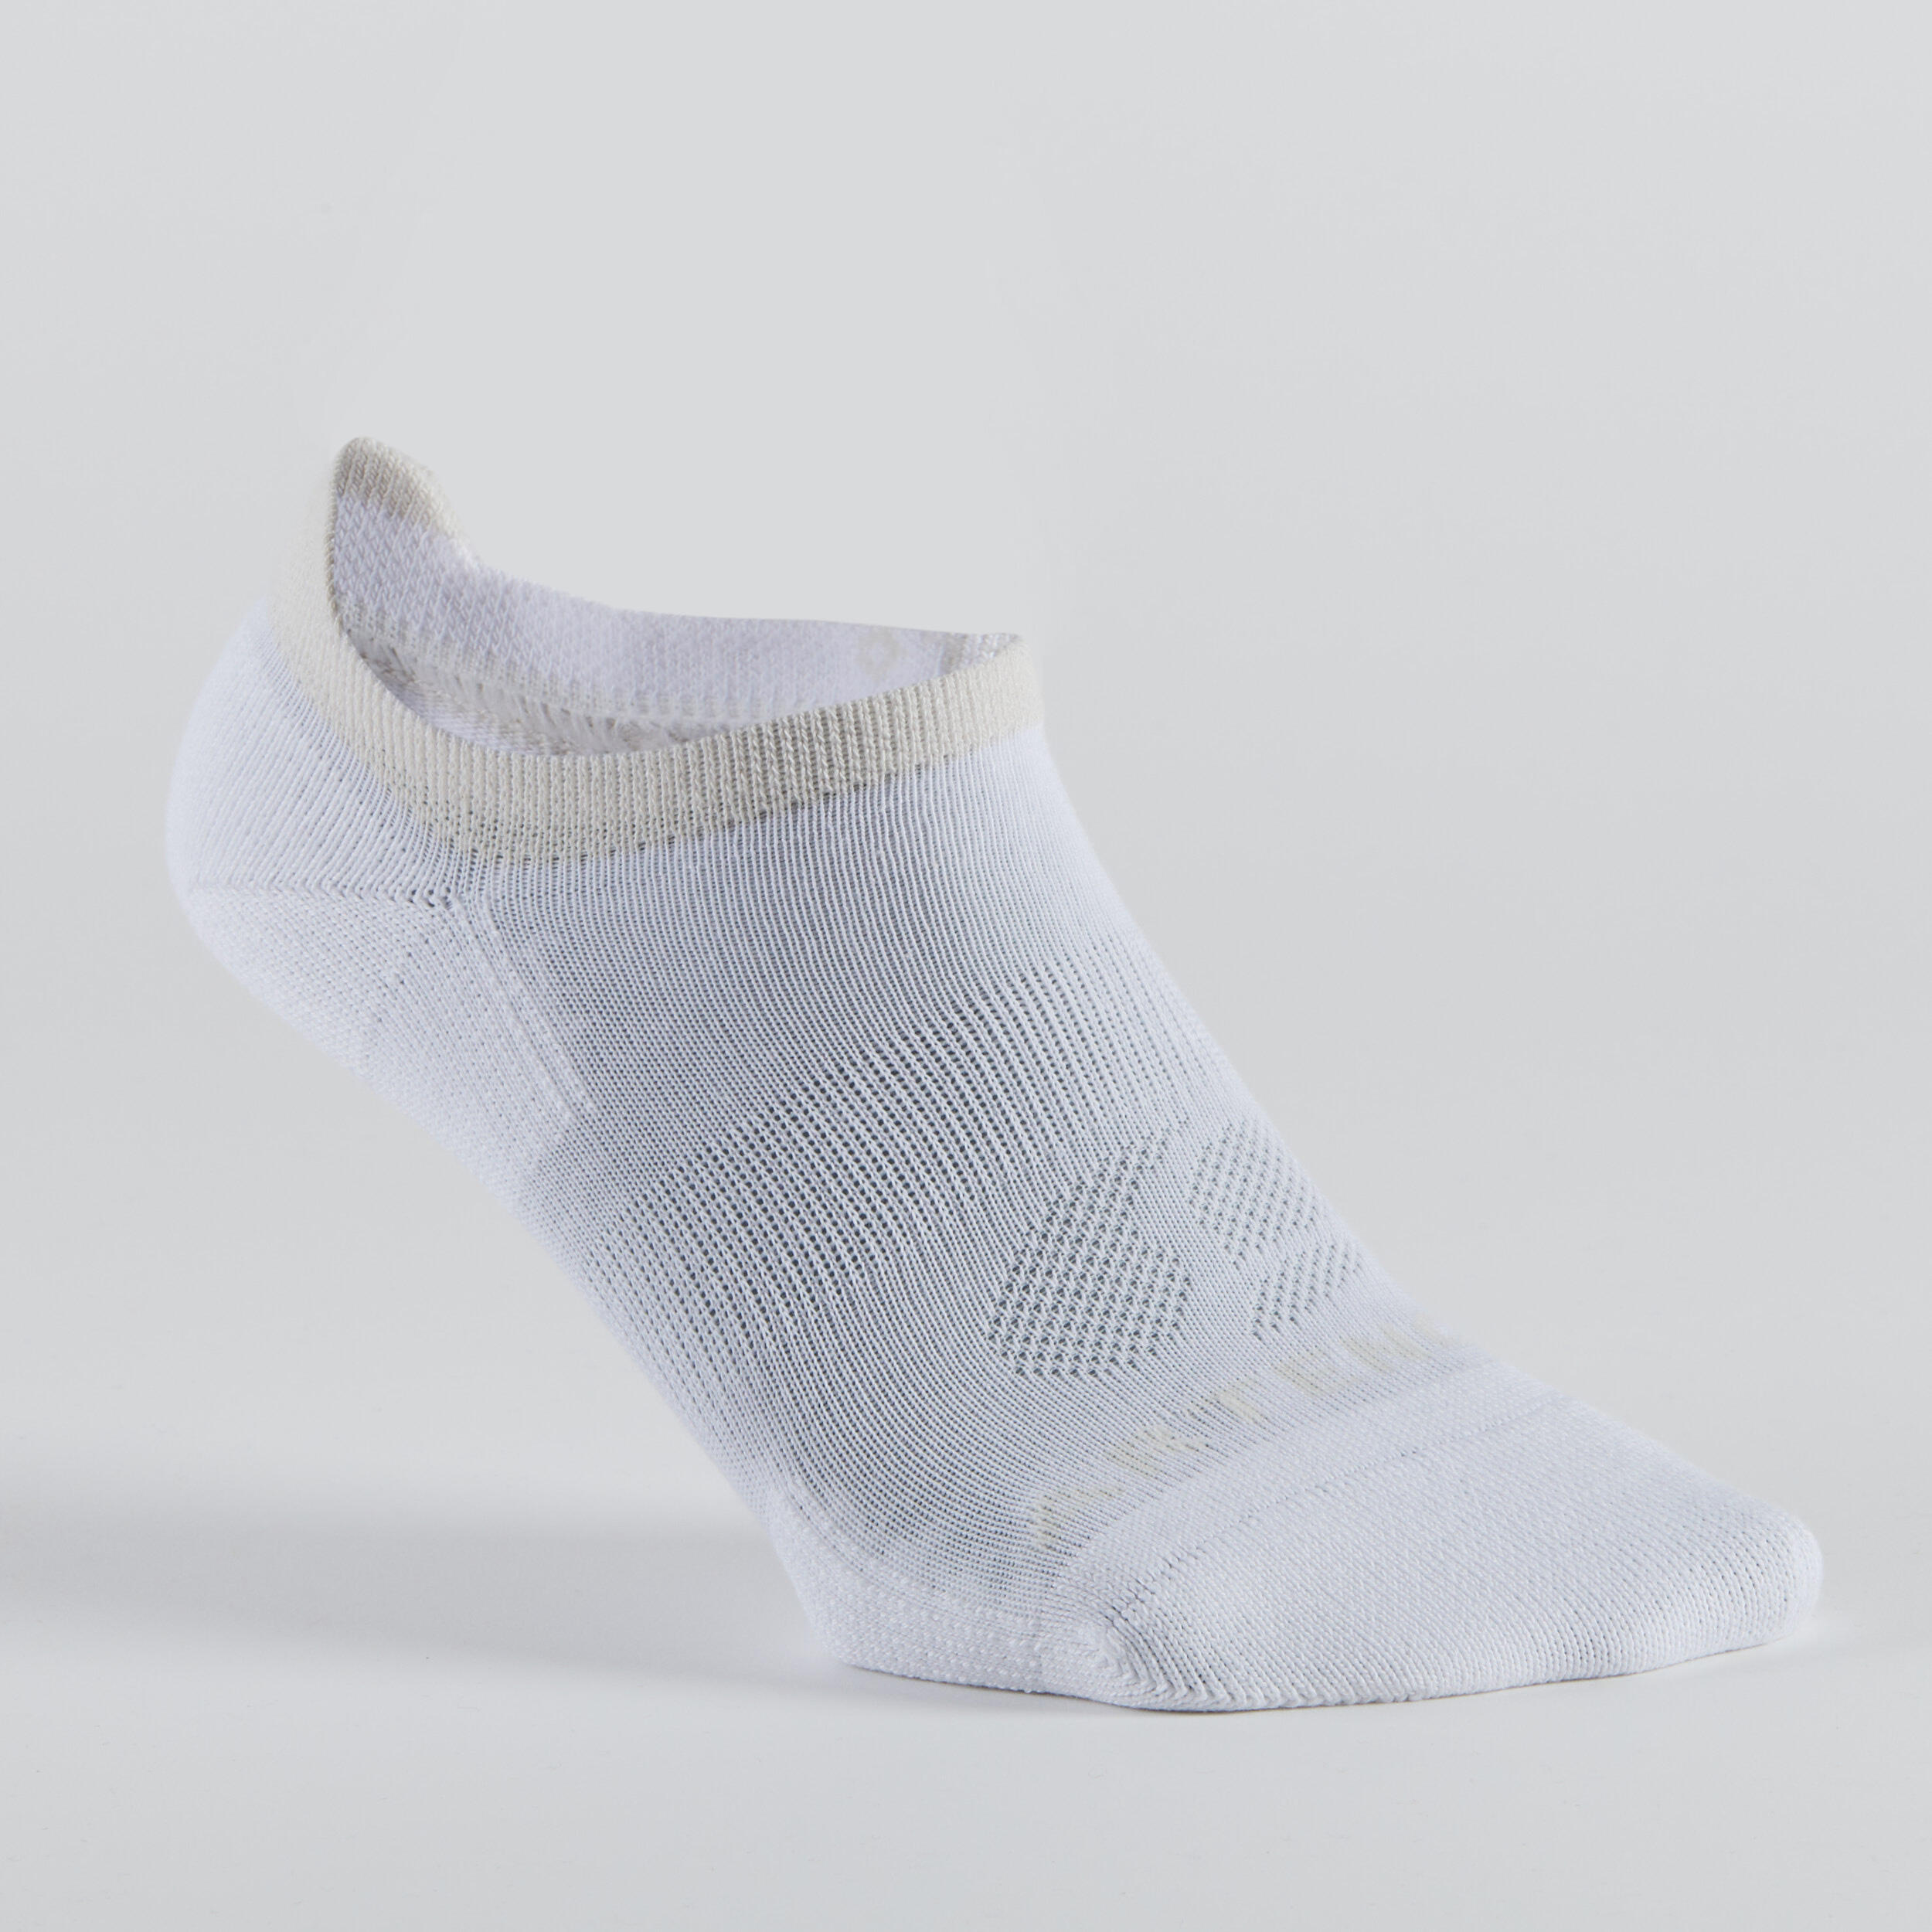 Low Sports Socks Tri-Pack RS 160 - Camo/Taupe/White 7/14